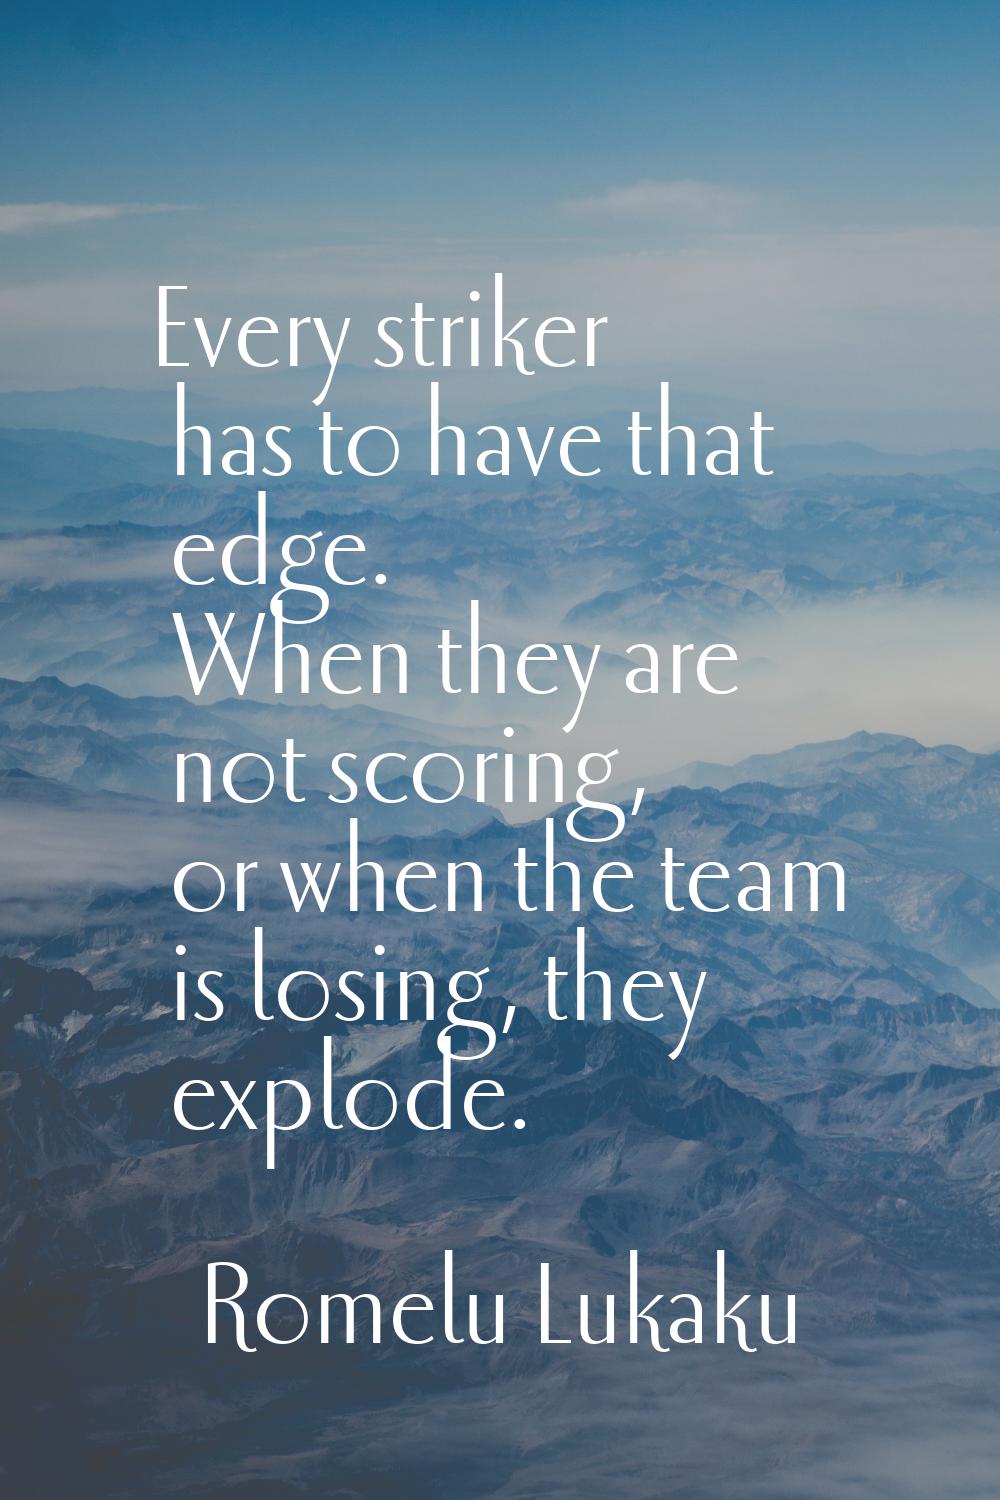 Every striker has to have that edge. When they are not scoring, or when the team is losing, they ex